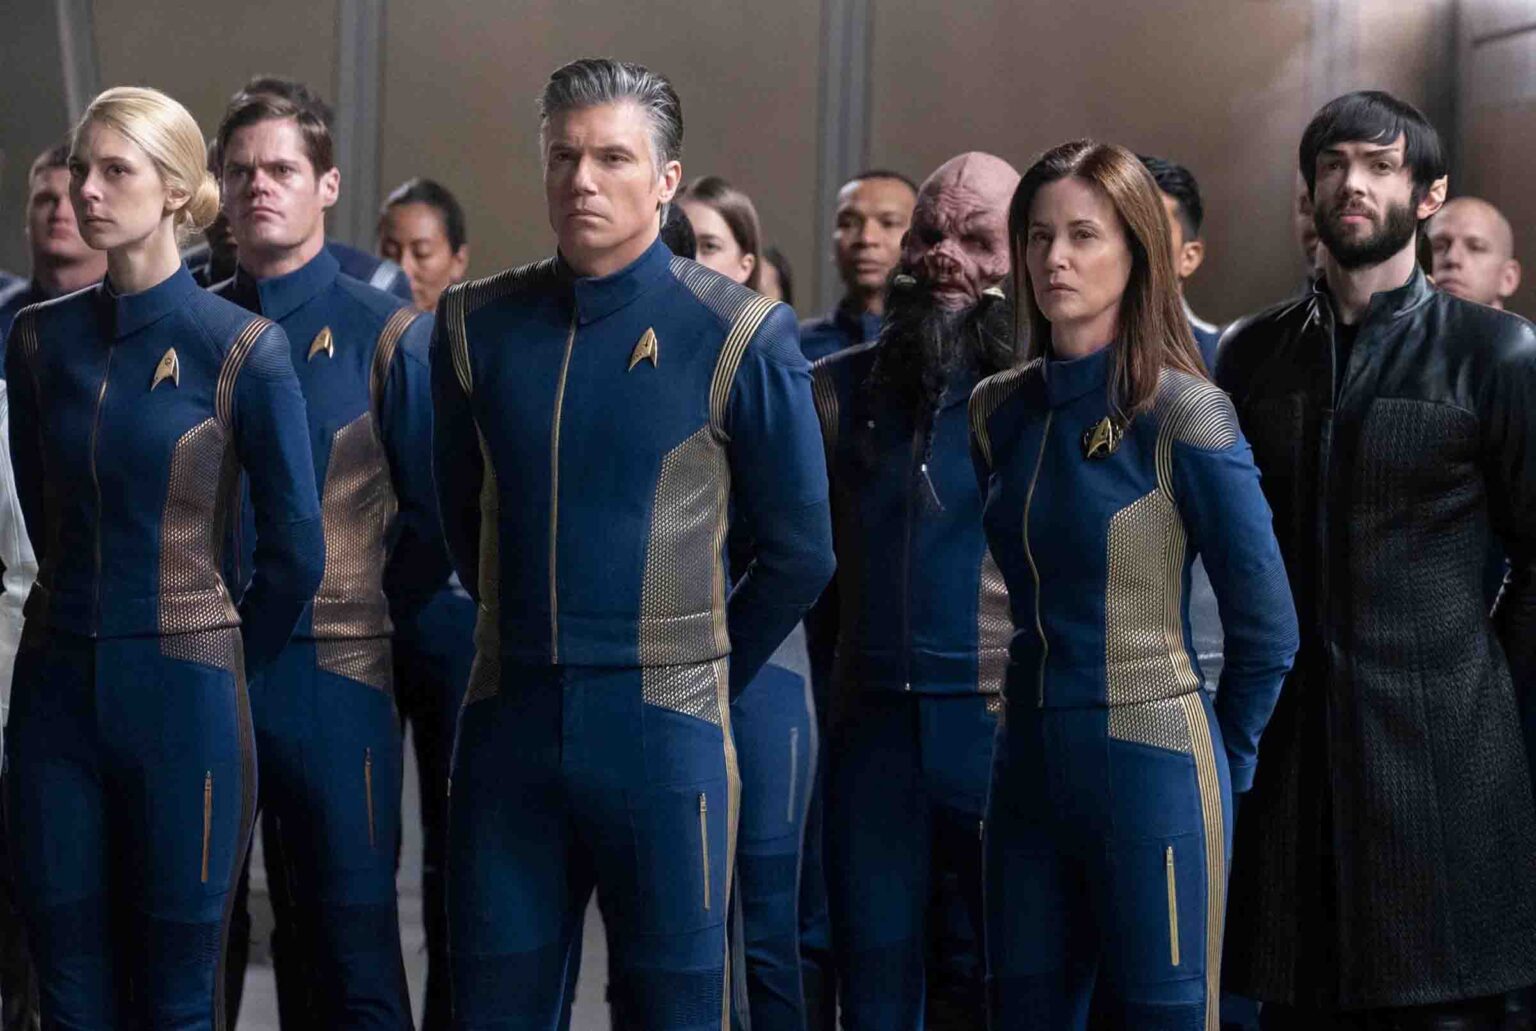 We've already learned thanks to 'Star Trek: Discovery' that CBS can't make good 'Star Trek'. We're not holding our breath with the Pike spin-off.